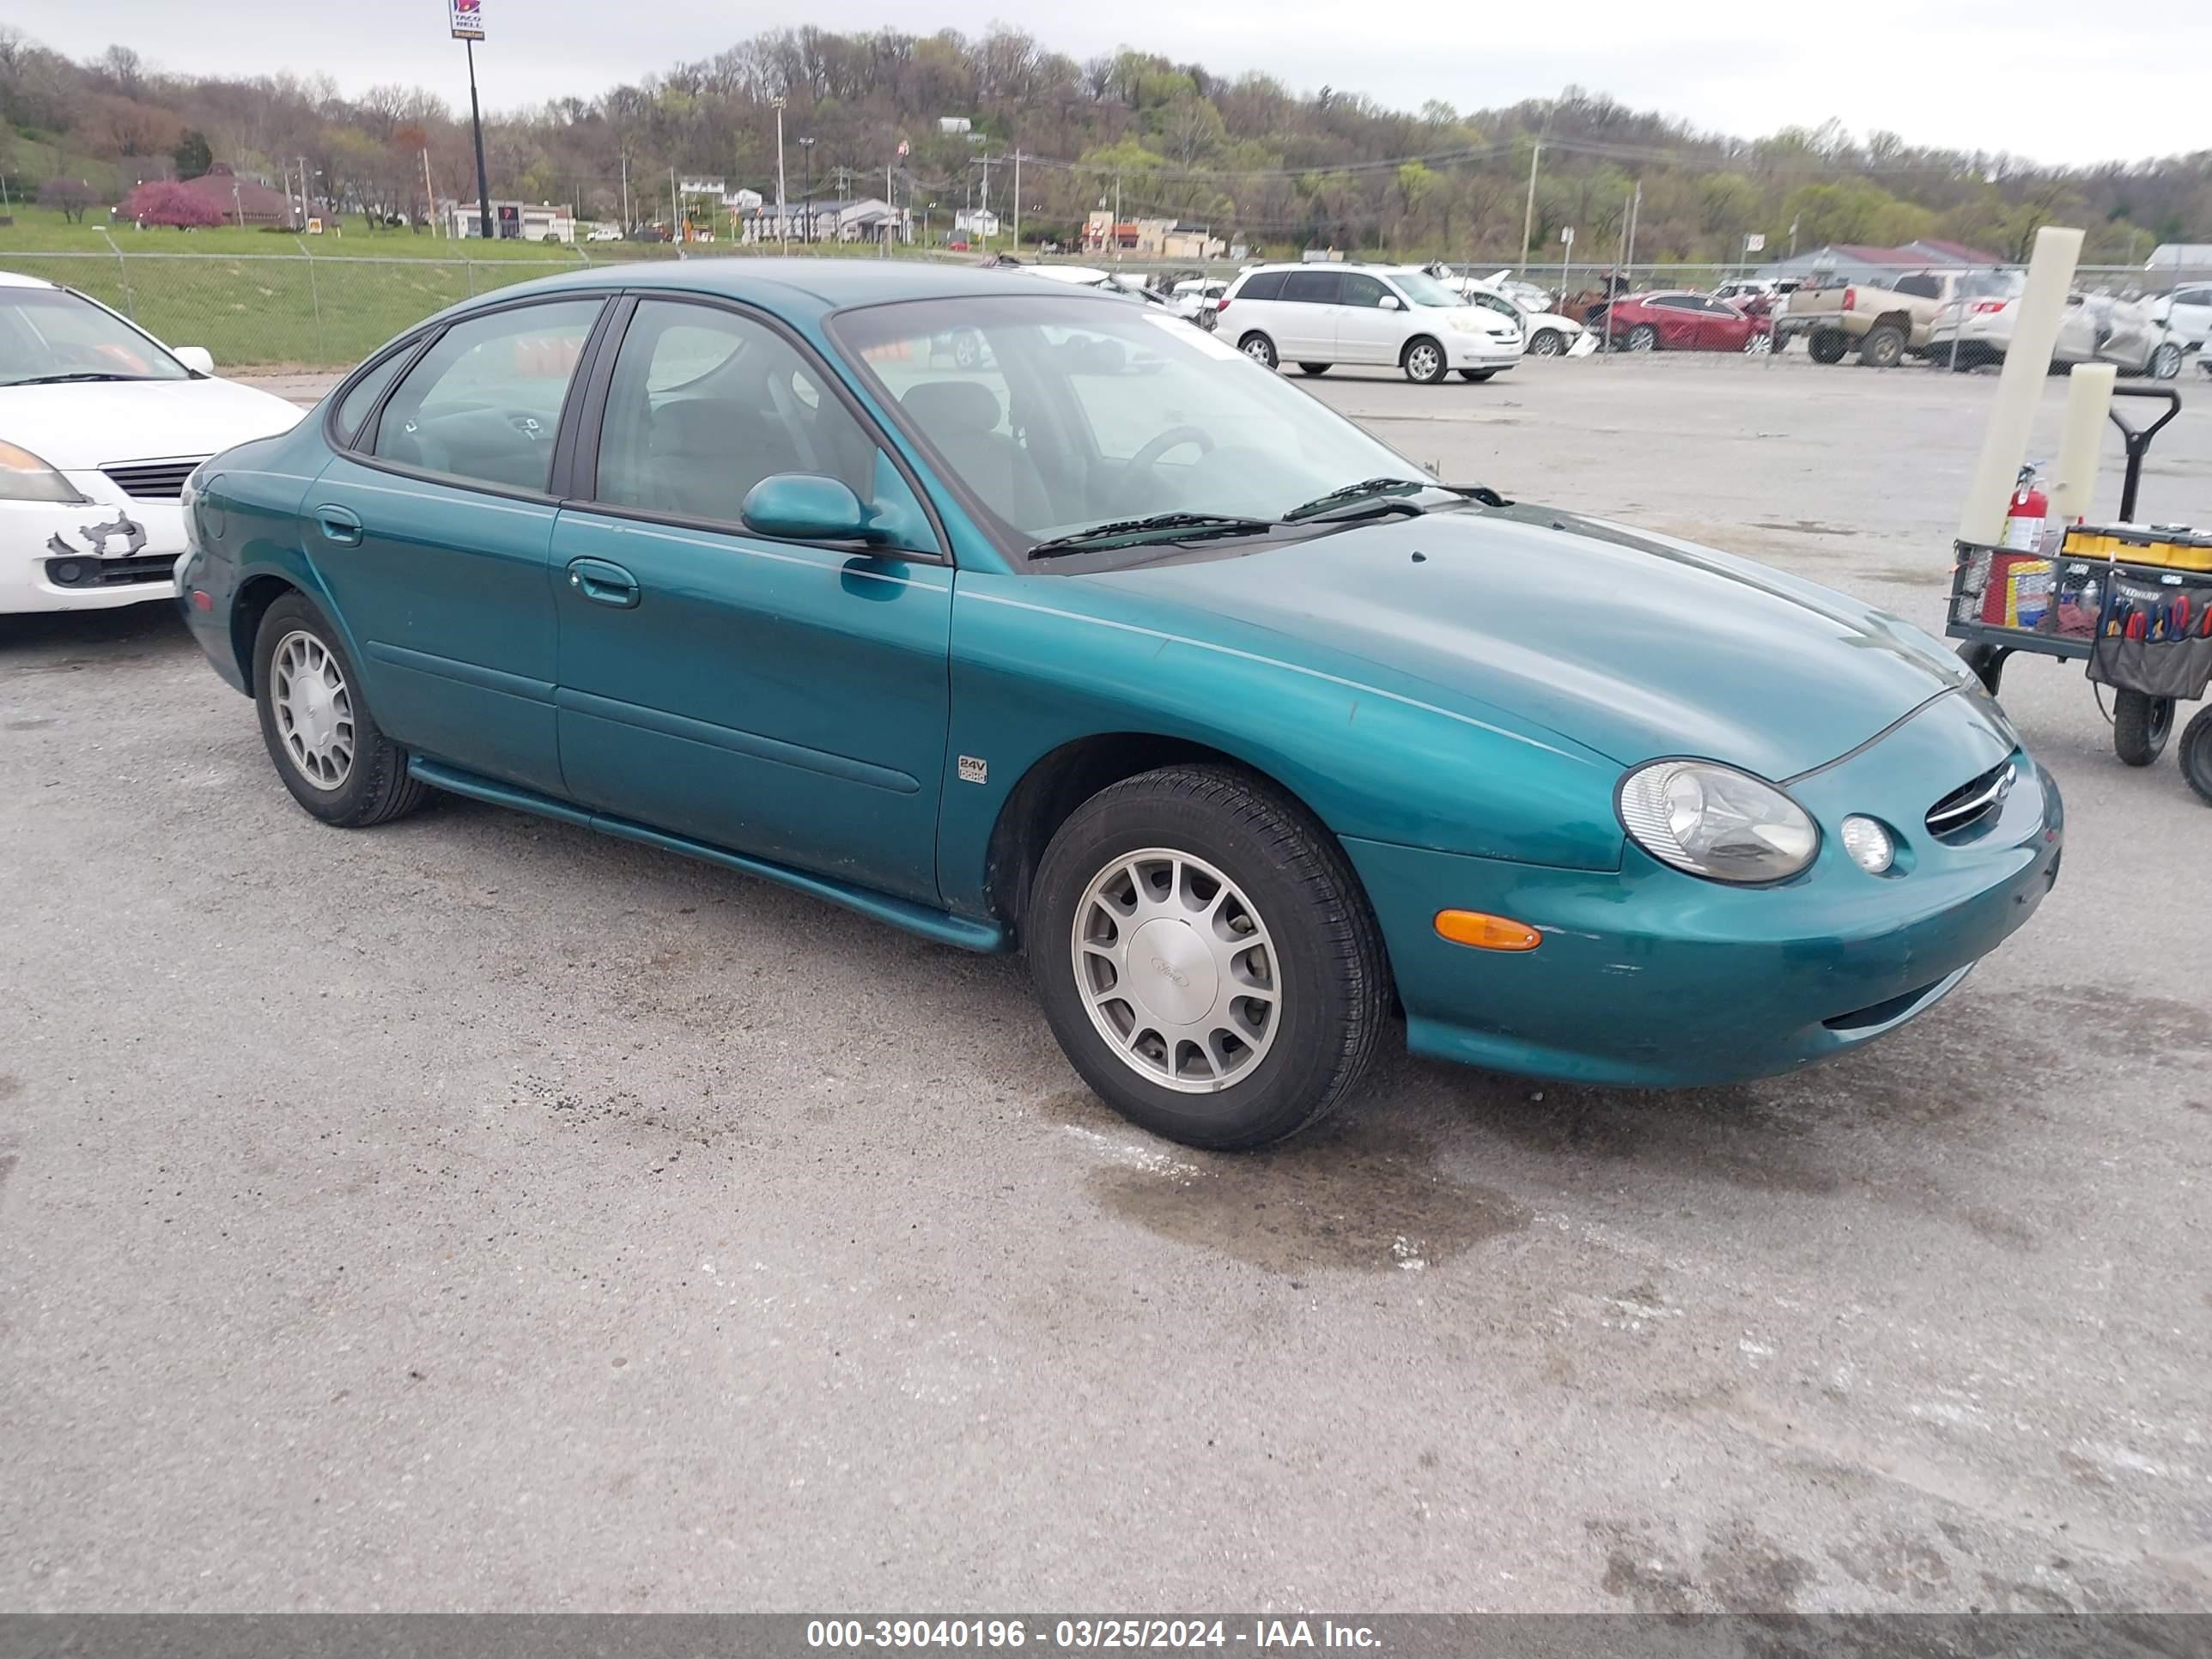 vin: 1FAFP53S4WA144420 1FAFP53S4WA144420 1998 ford taurus 3000 for Sale in 62232, 2436 Old Country Inn Dr, Caseyville, Illinois, USA